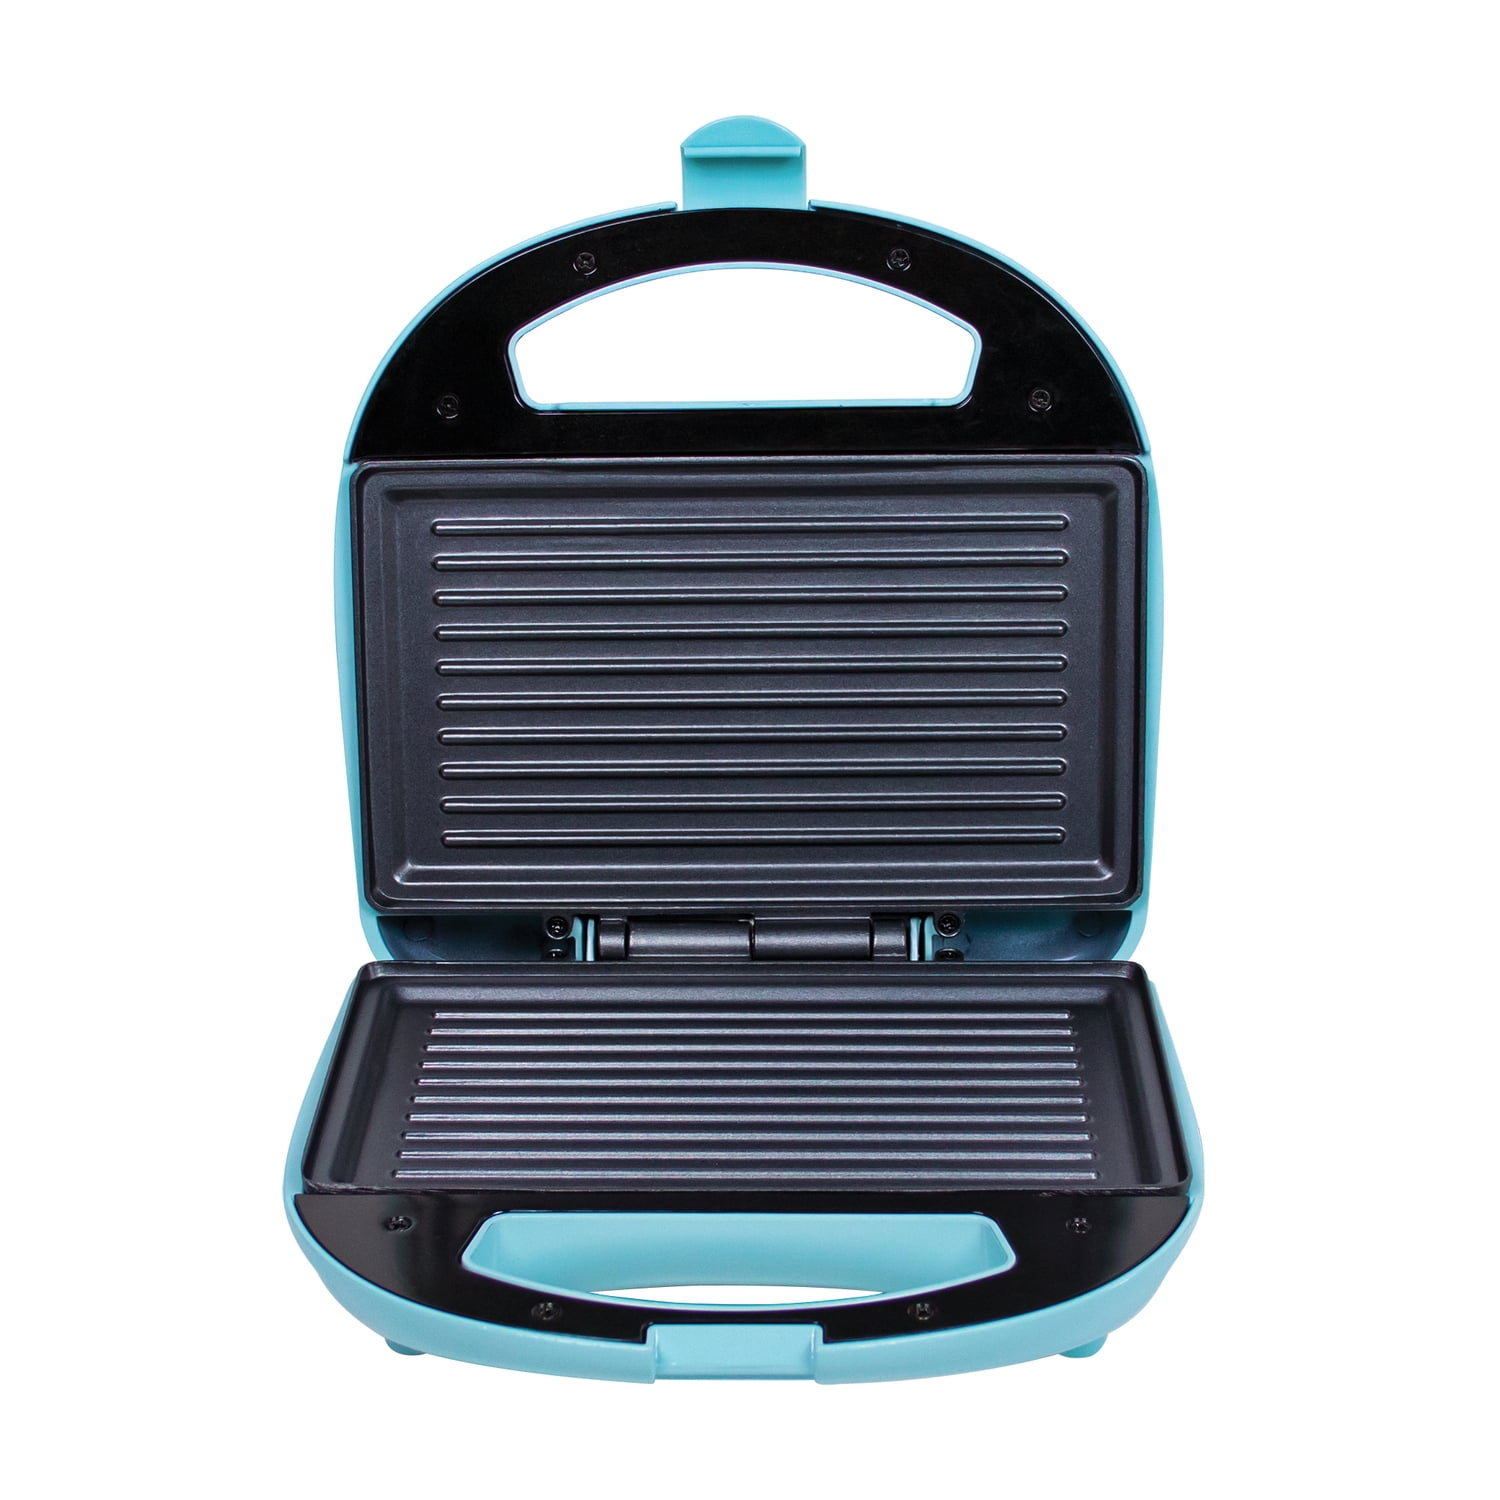 sandwich maker, electric turquoise - Whisk